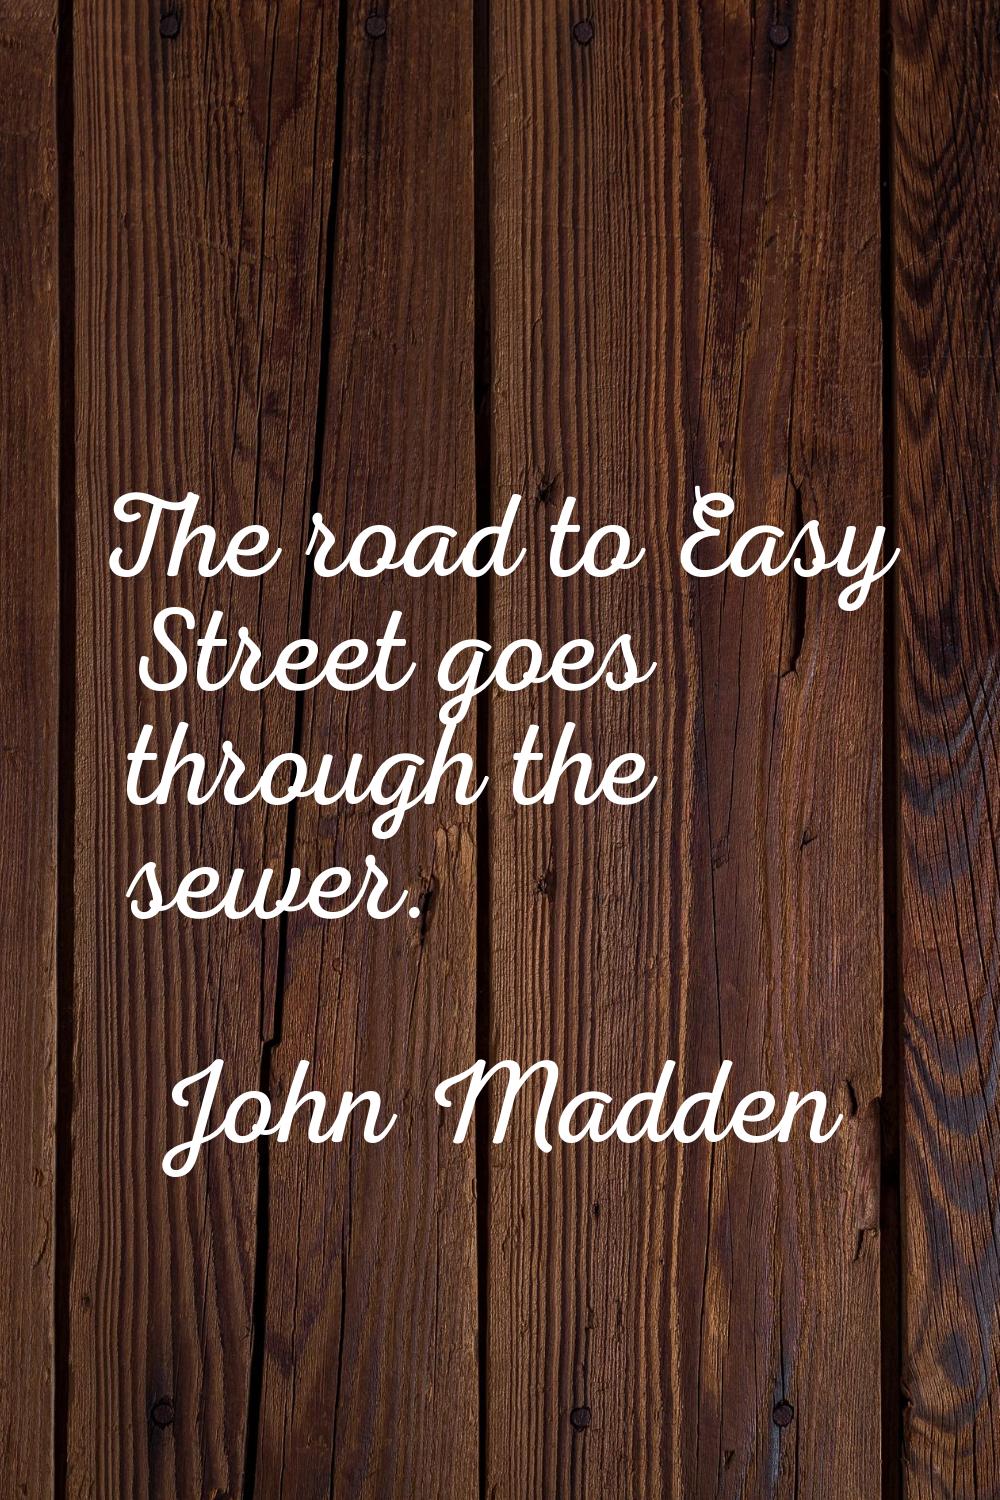 The road to Easy Street goes through the sewer.